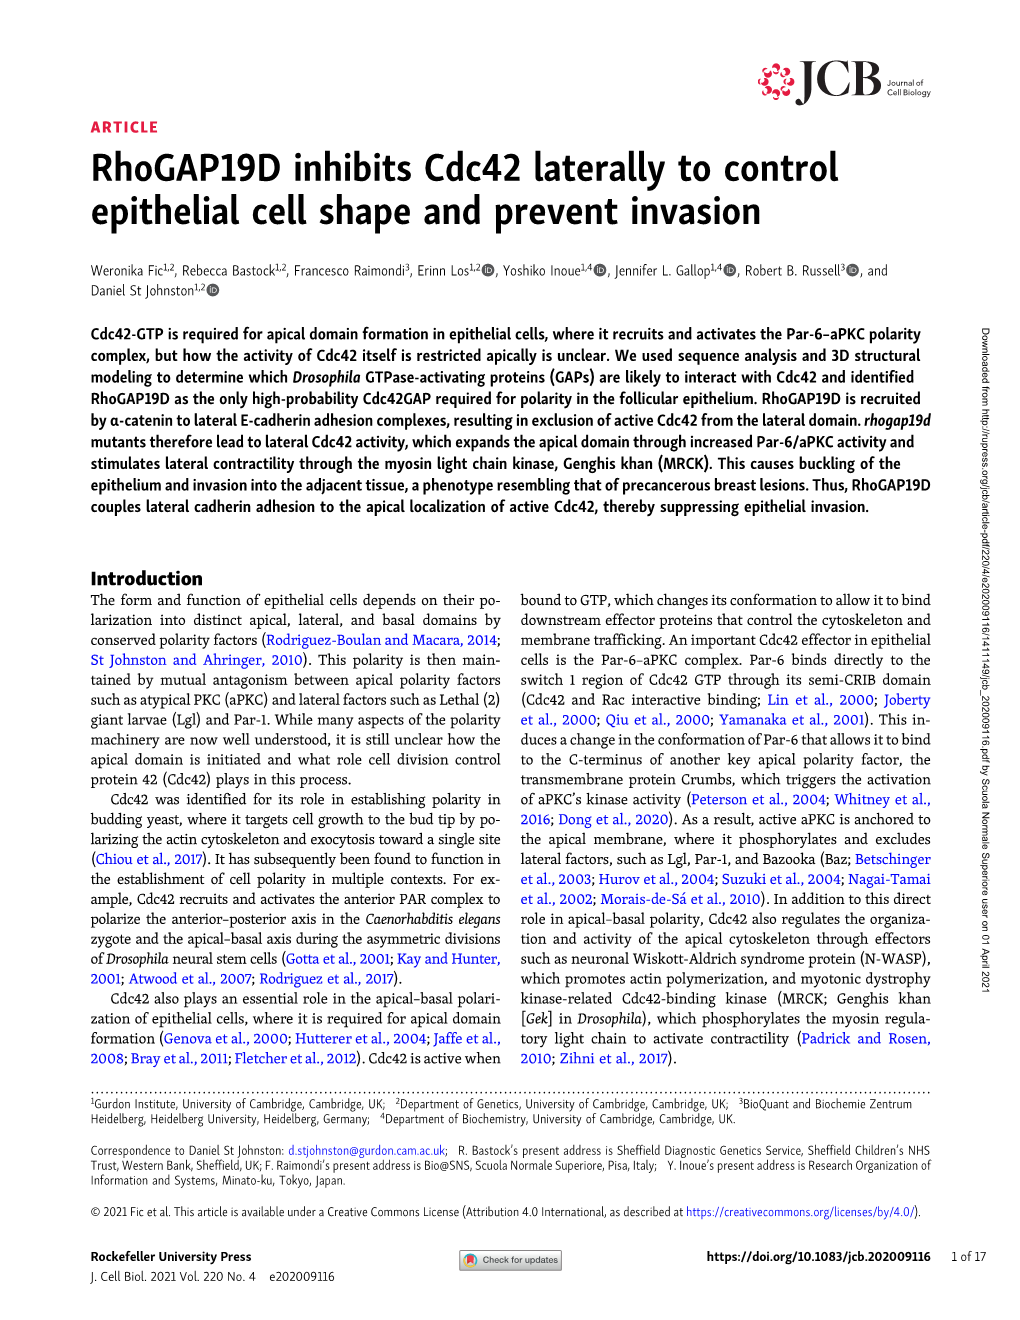 Rhogap19d Inhibits Cdc42 Laterally to Control Epithelial Cell Shape and Prevent Invasion